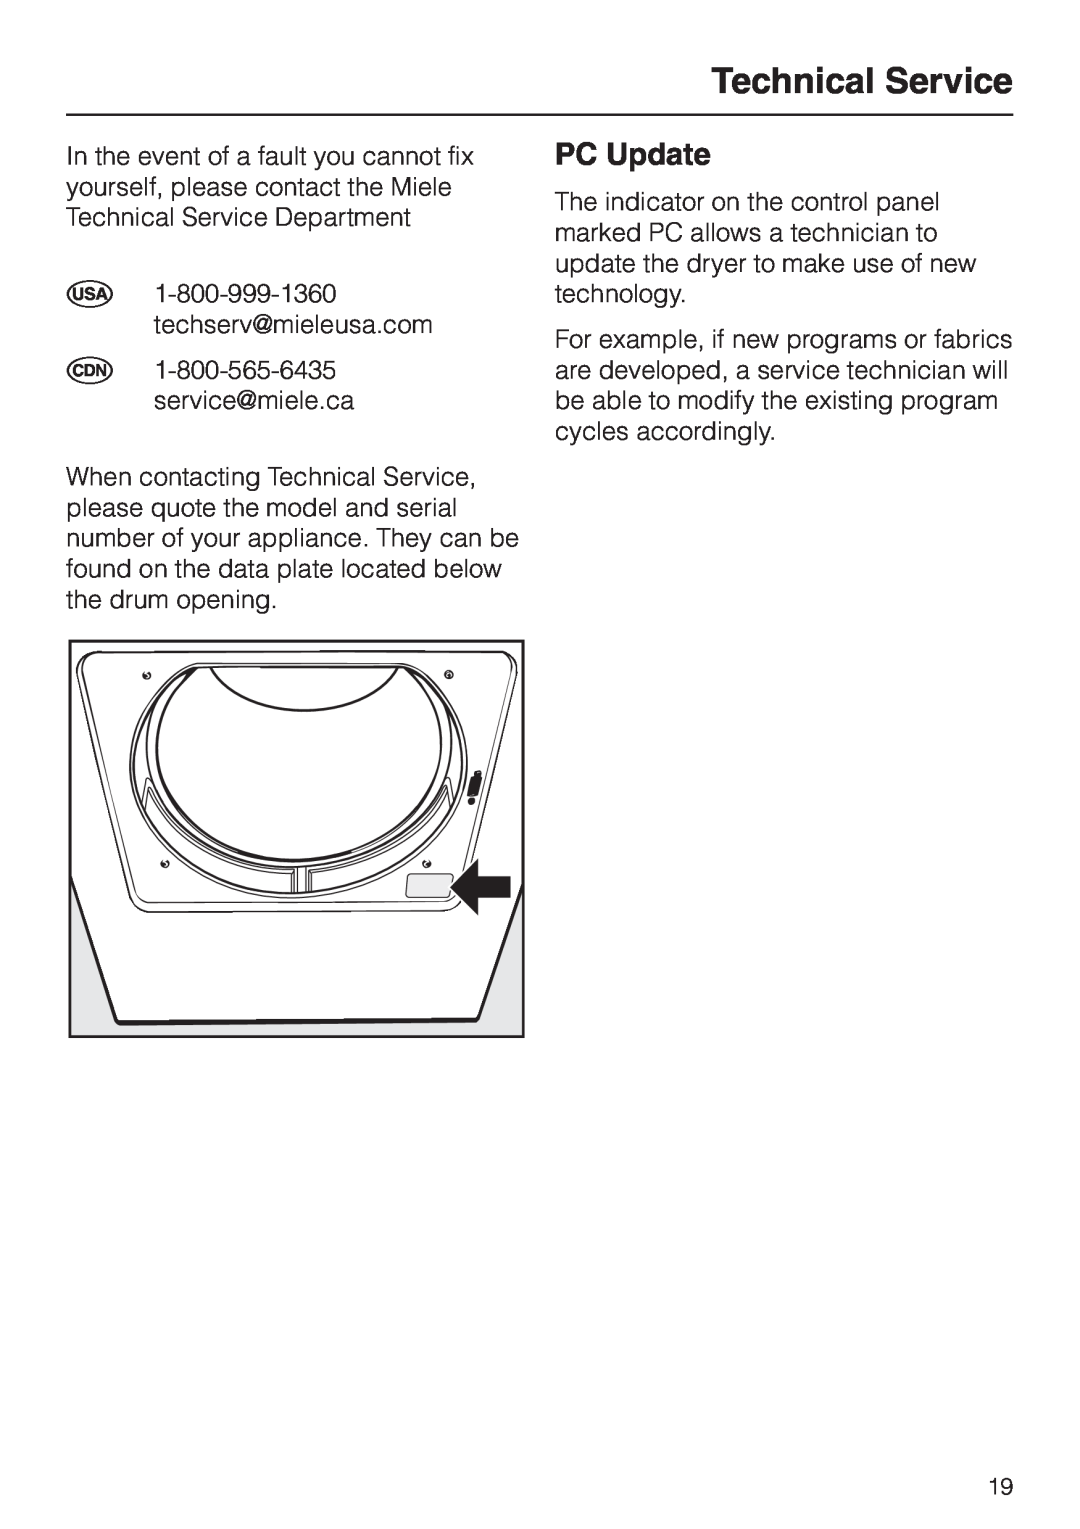 Miele T 1413 T 1415 operating instructions Technical Service, PC Update 